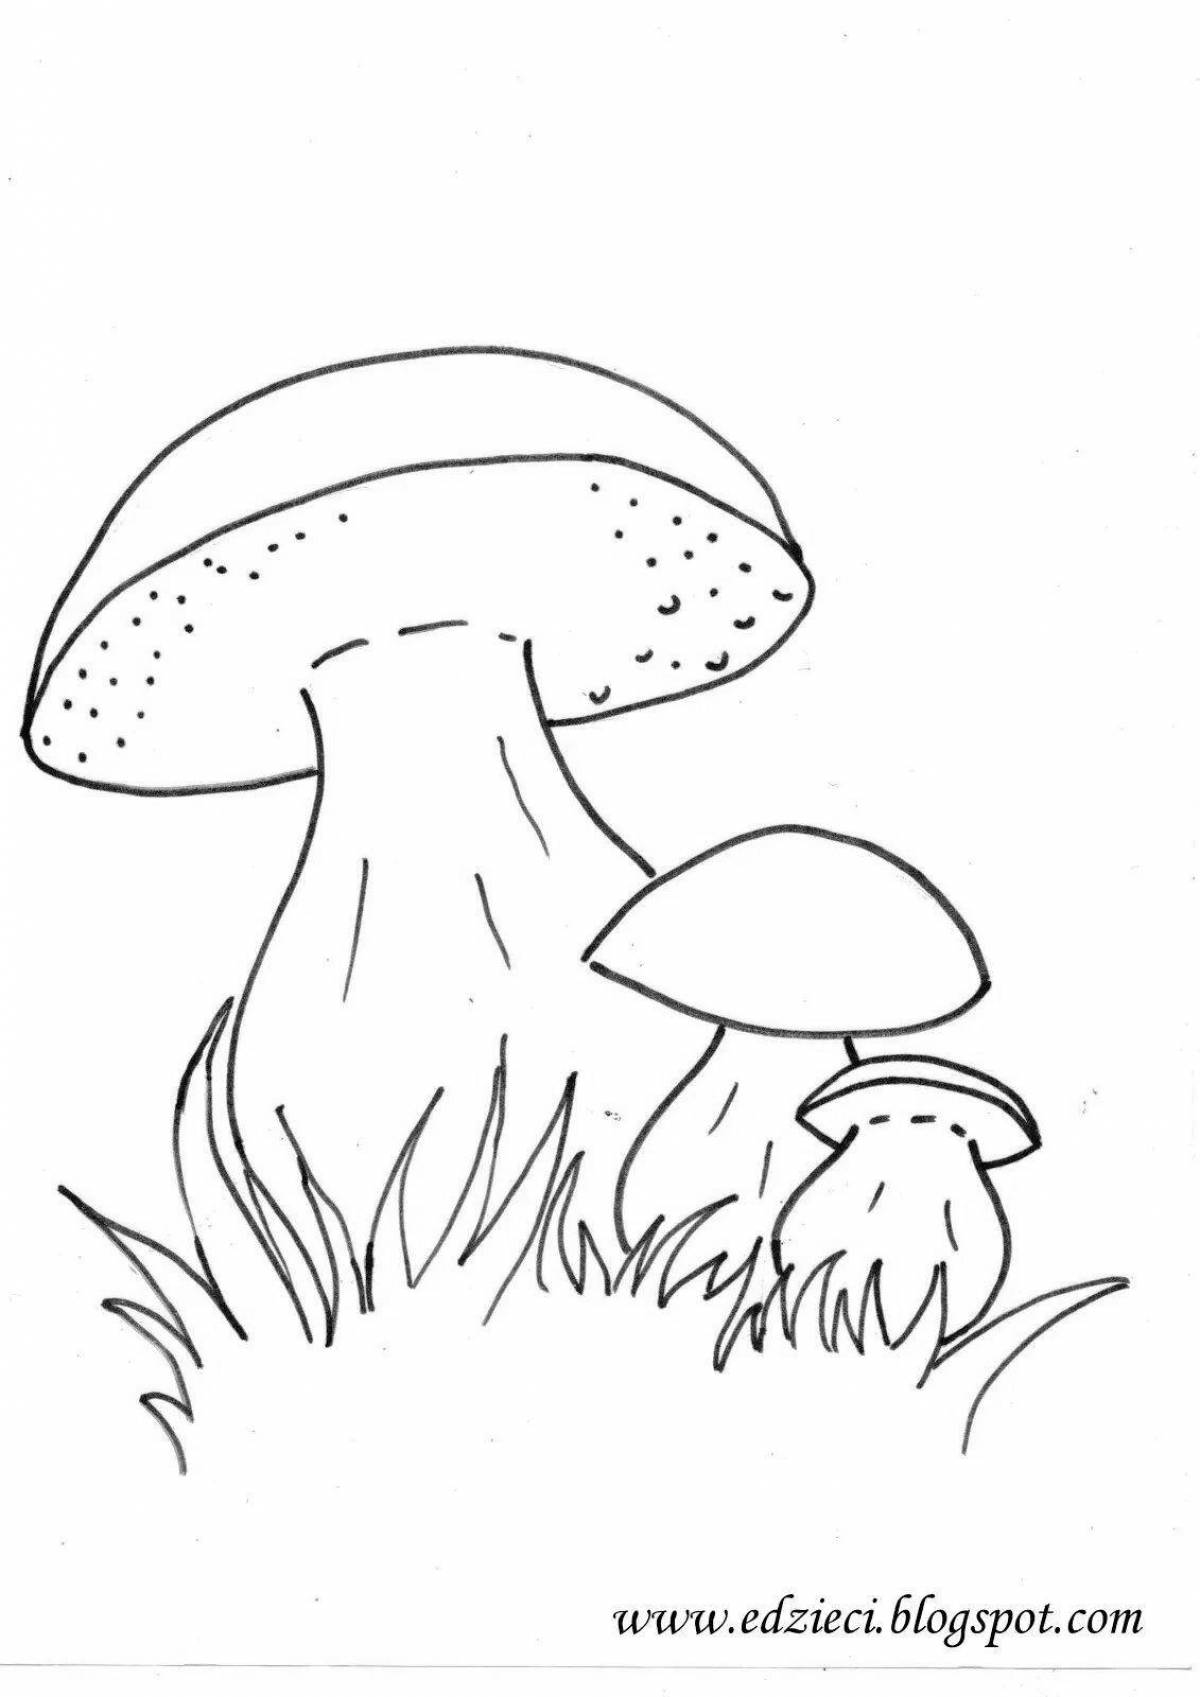 Awesome porcini mushroom coloring pages for kids